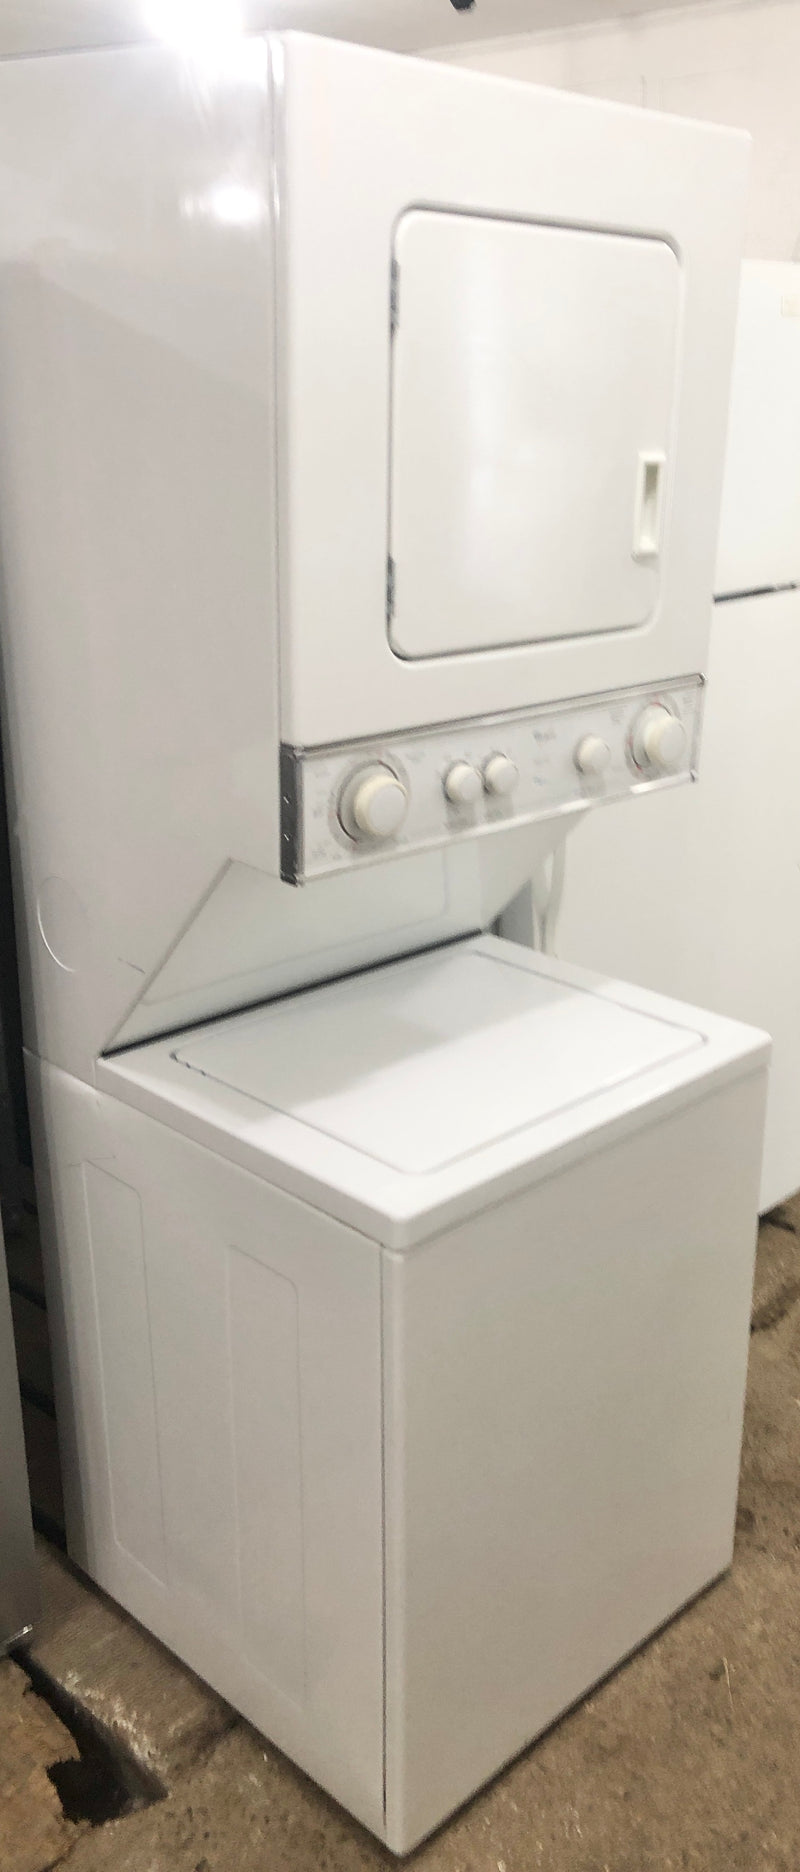 Whirlpool 24" Wide Apartment Size White (Laundry Centre), Stacker, Washer and Dryer, Free 60 Day Warranty